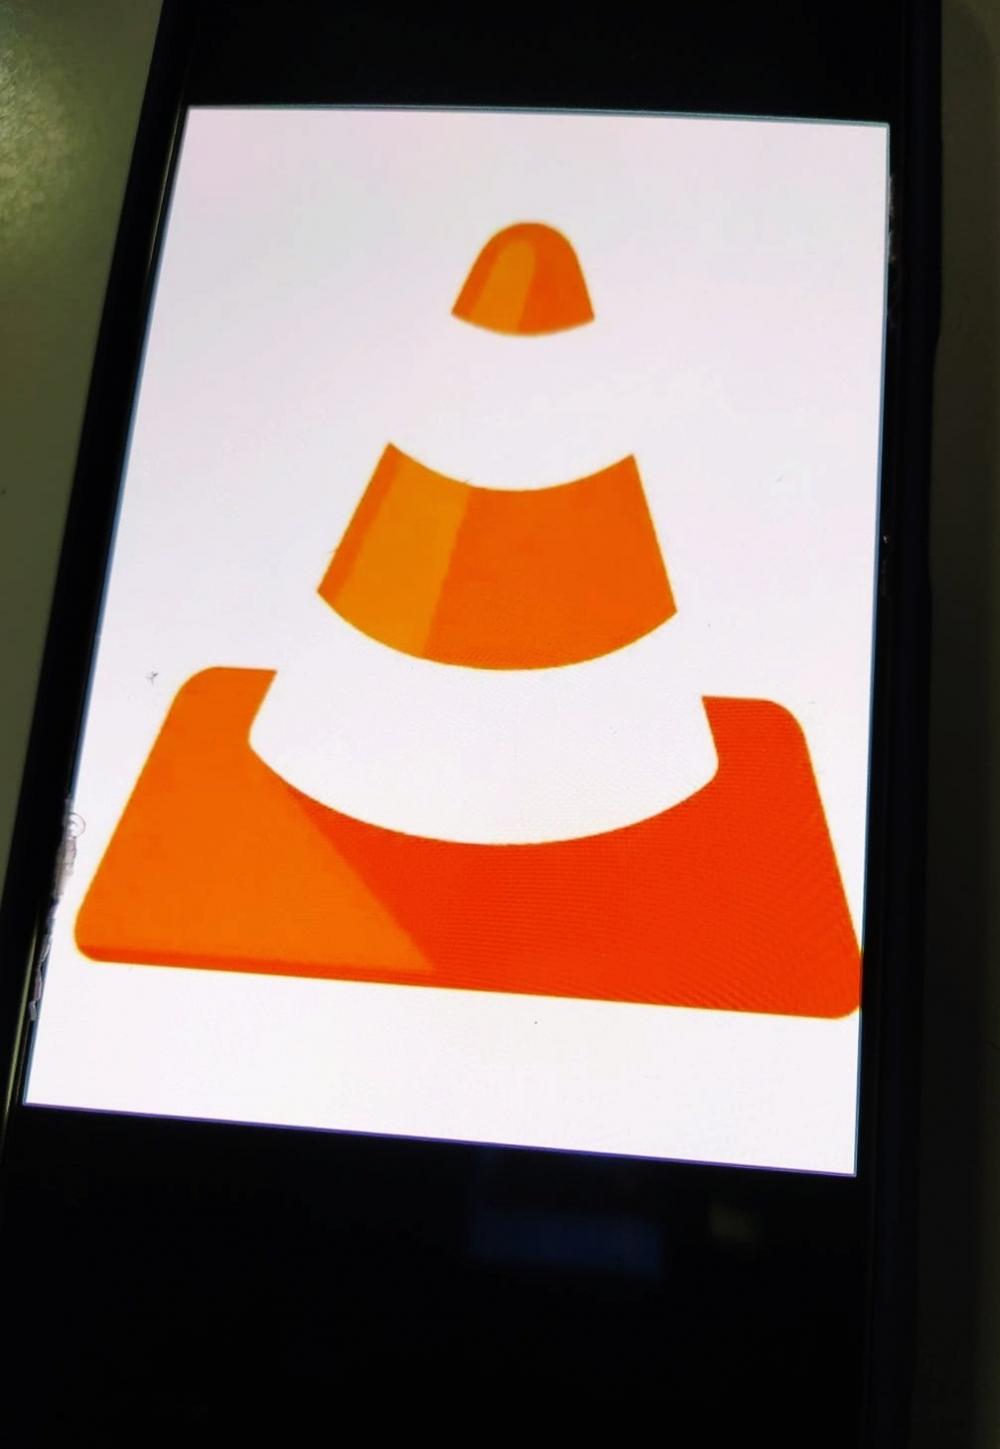 The Weekend Leader - Government lifts download ban on VLC Media Player